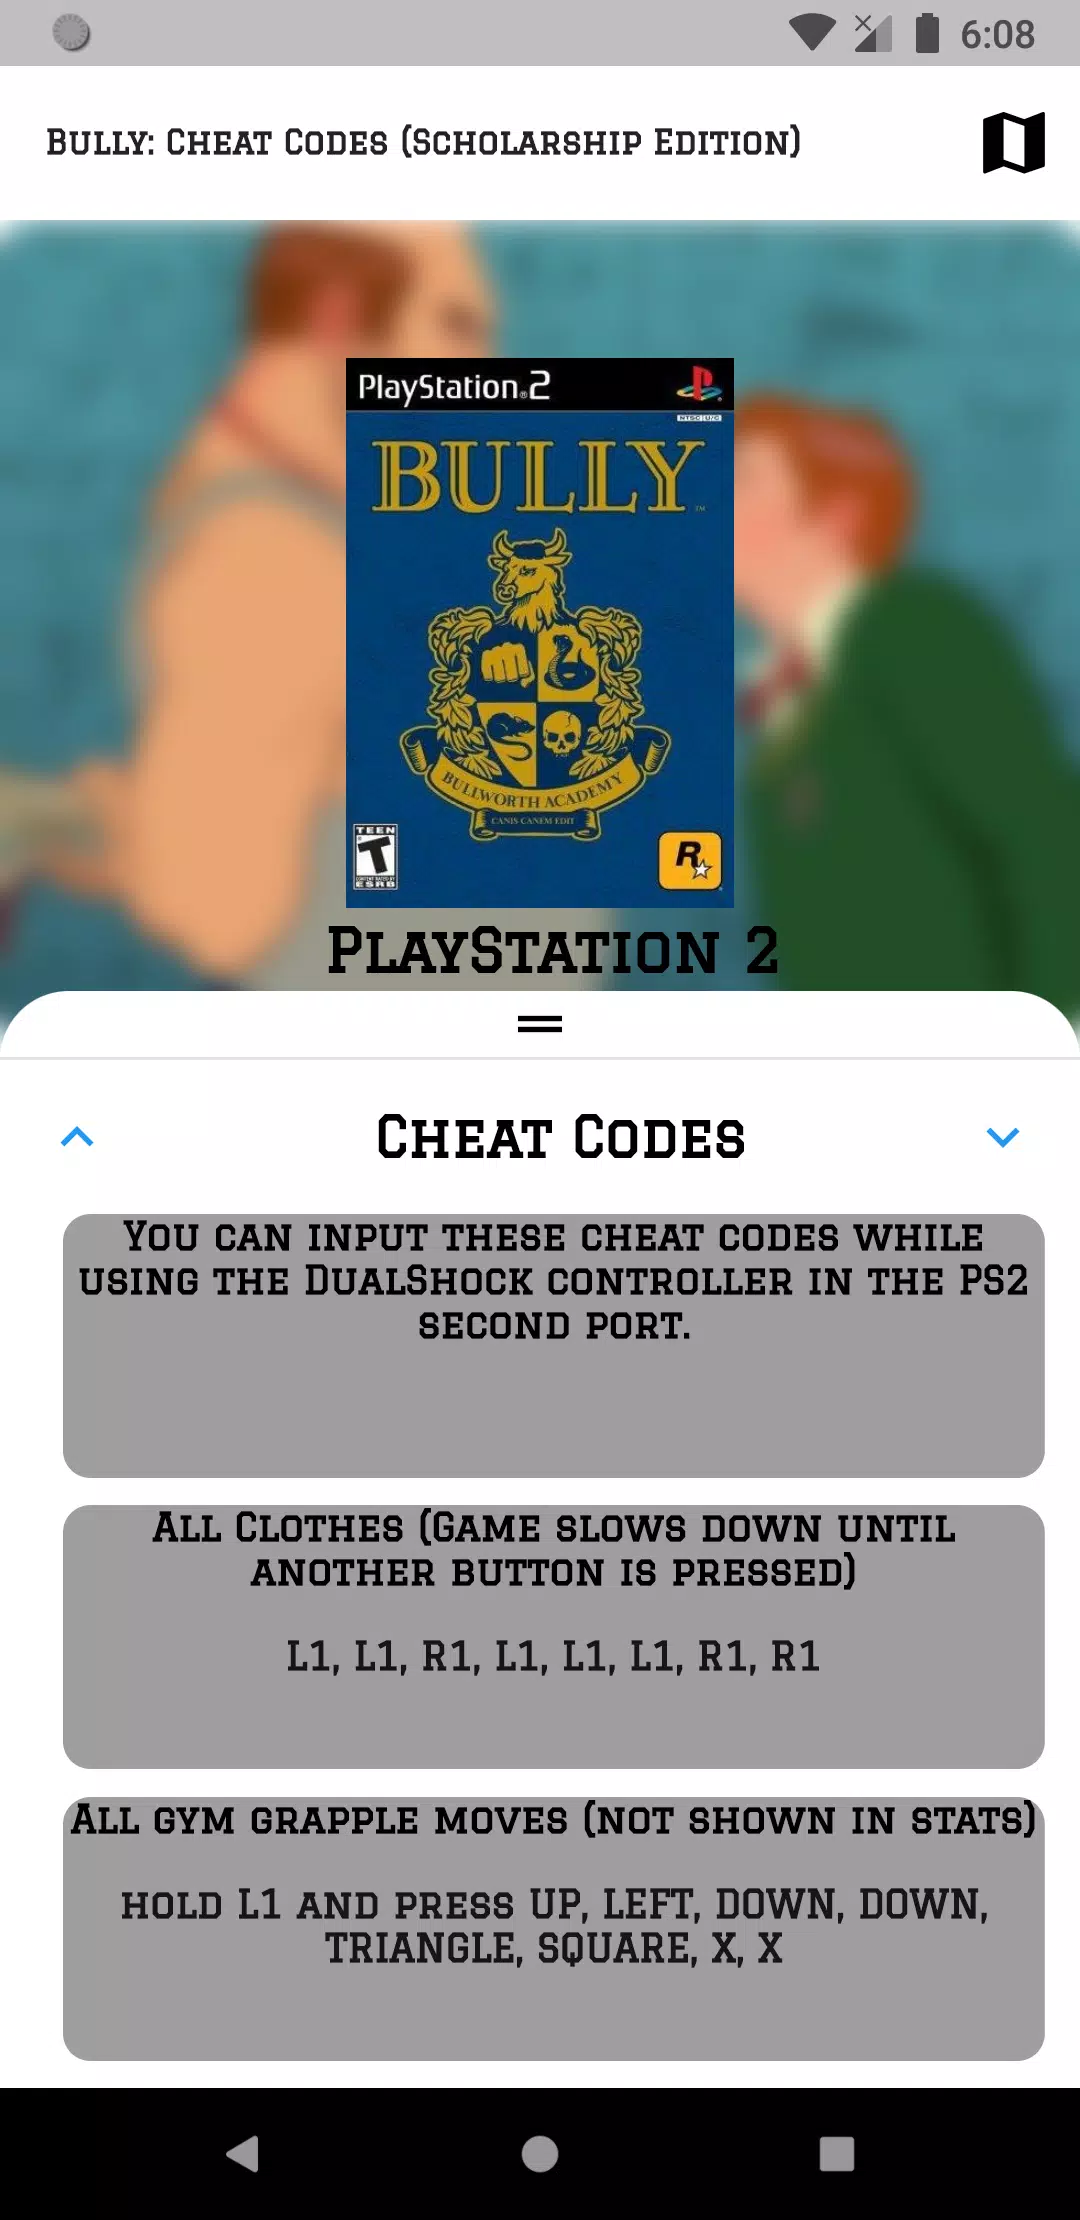 Bully: Cheat Codes - Scholarship Edition APK pour Android Télécharger